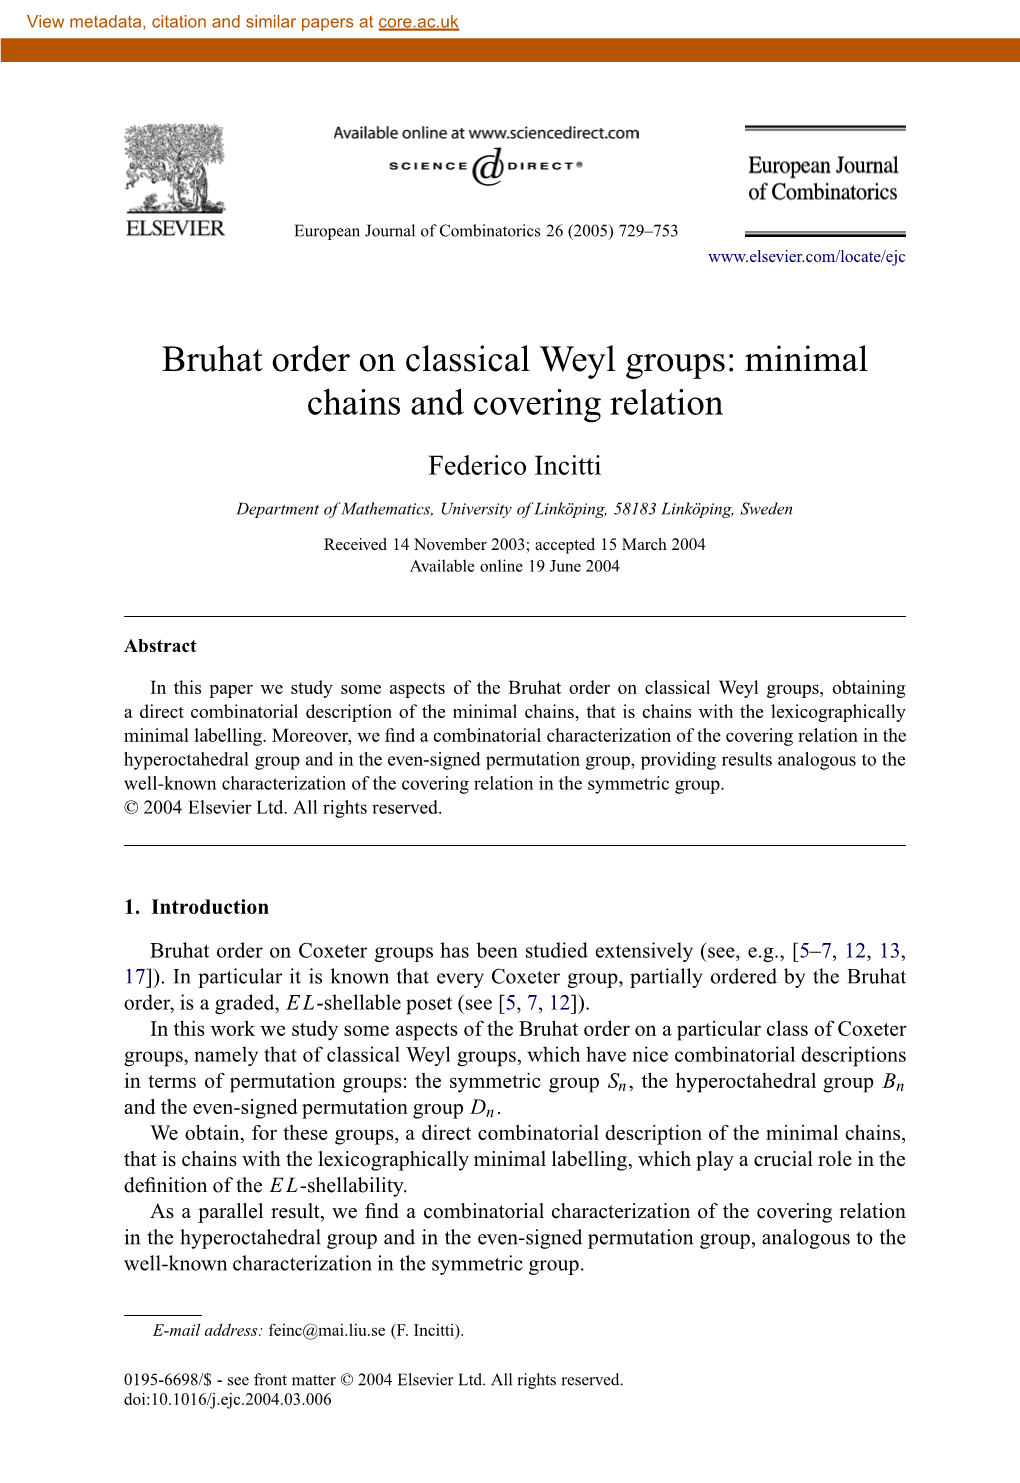 Bruhat Order on Classical Weyl Groups: Minimal Chains and Covering Relation